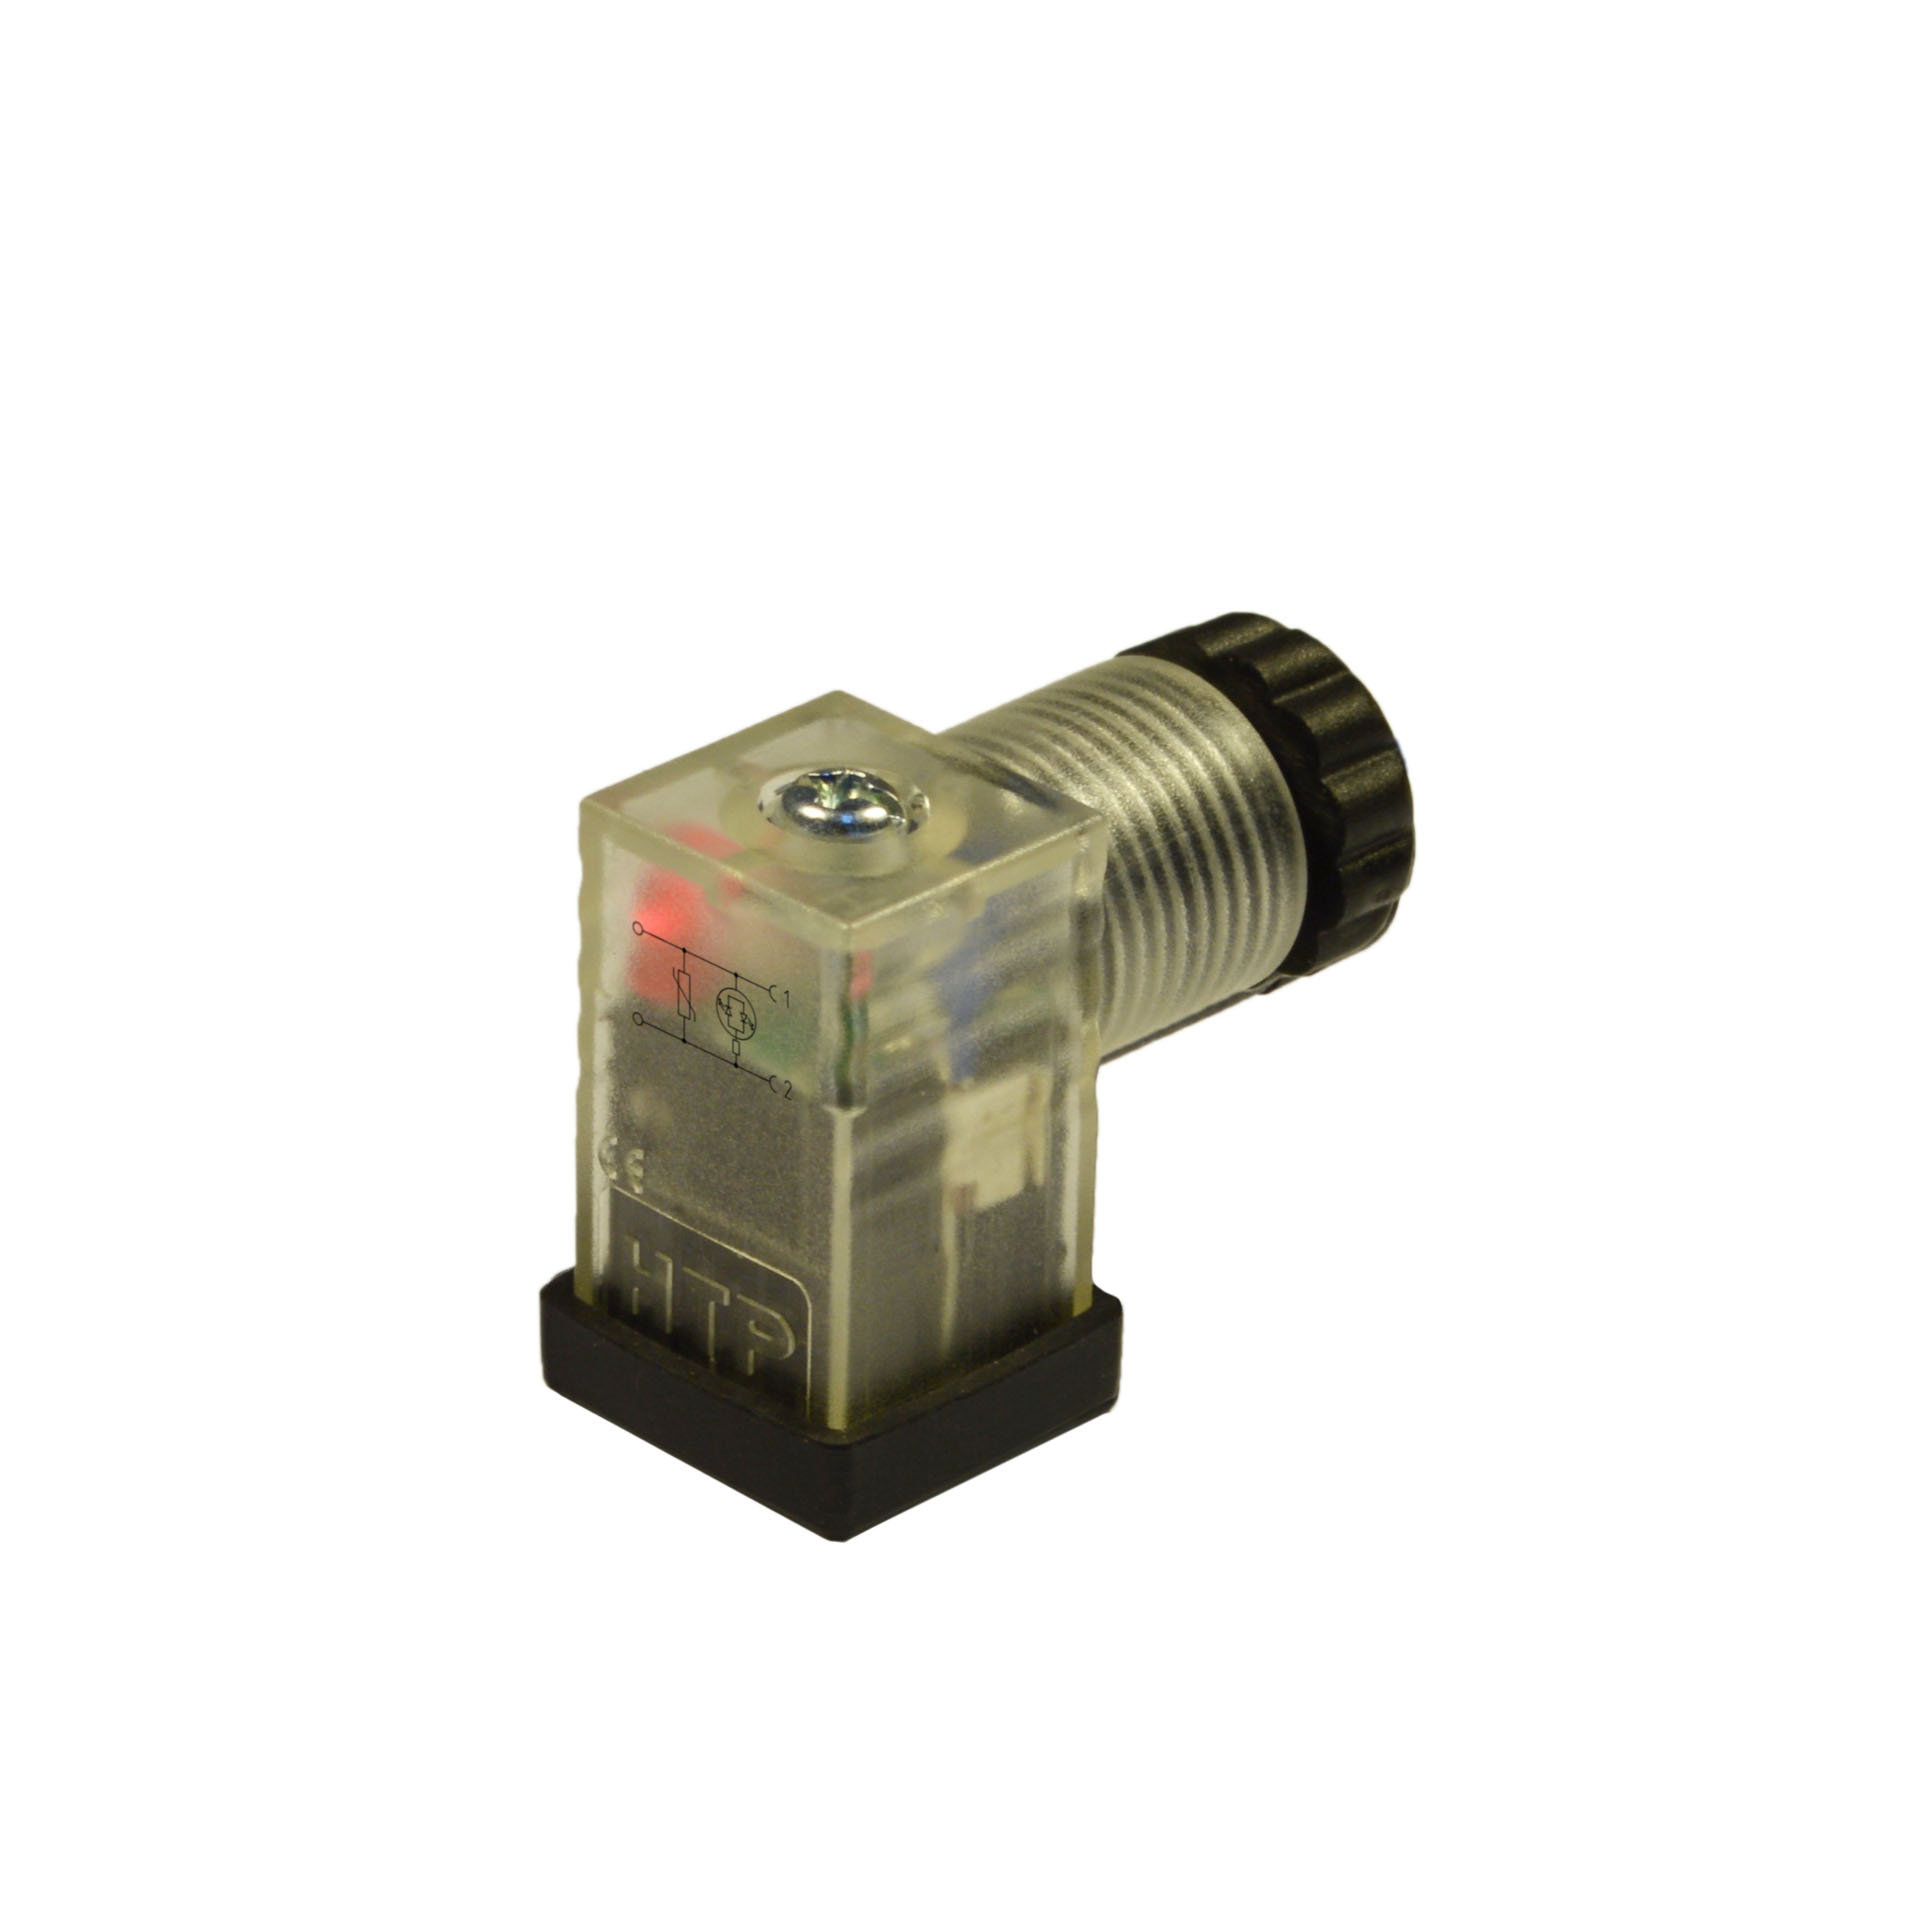 Industrial standard(typeC)field attachable,2p+PE(h.6),red LED+vdr,115VAC/DC,PG7